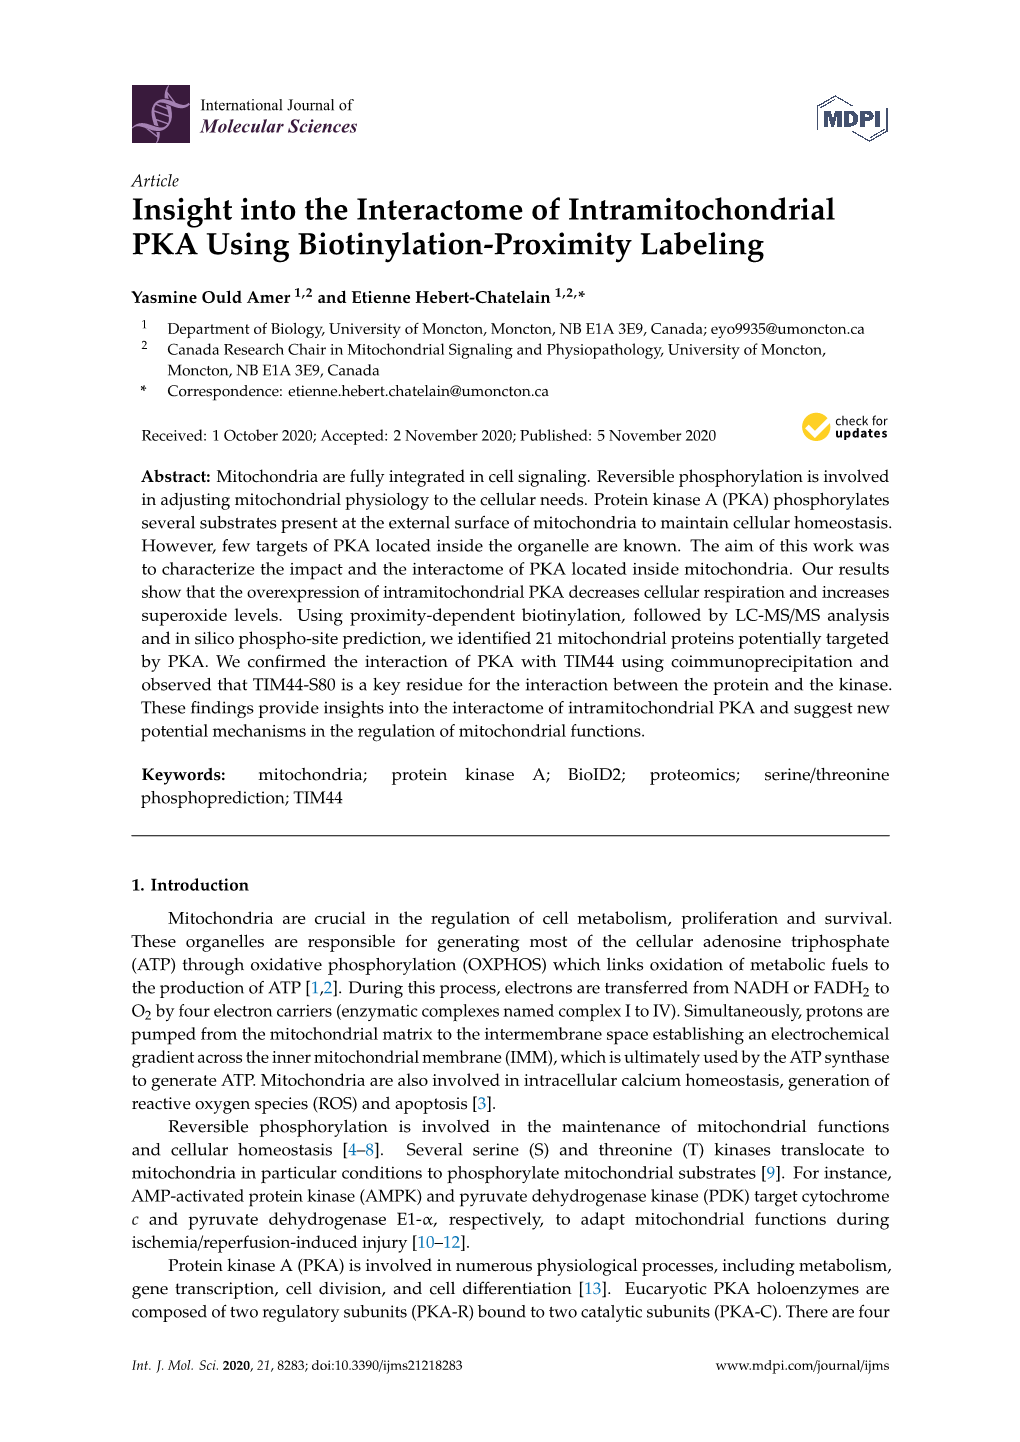 Insight Into the Interactome of Intramitochondrial PKA Using Biotinylation-Proximity Labeling